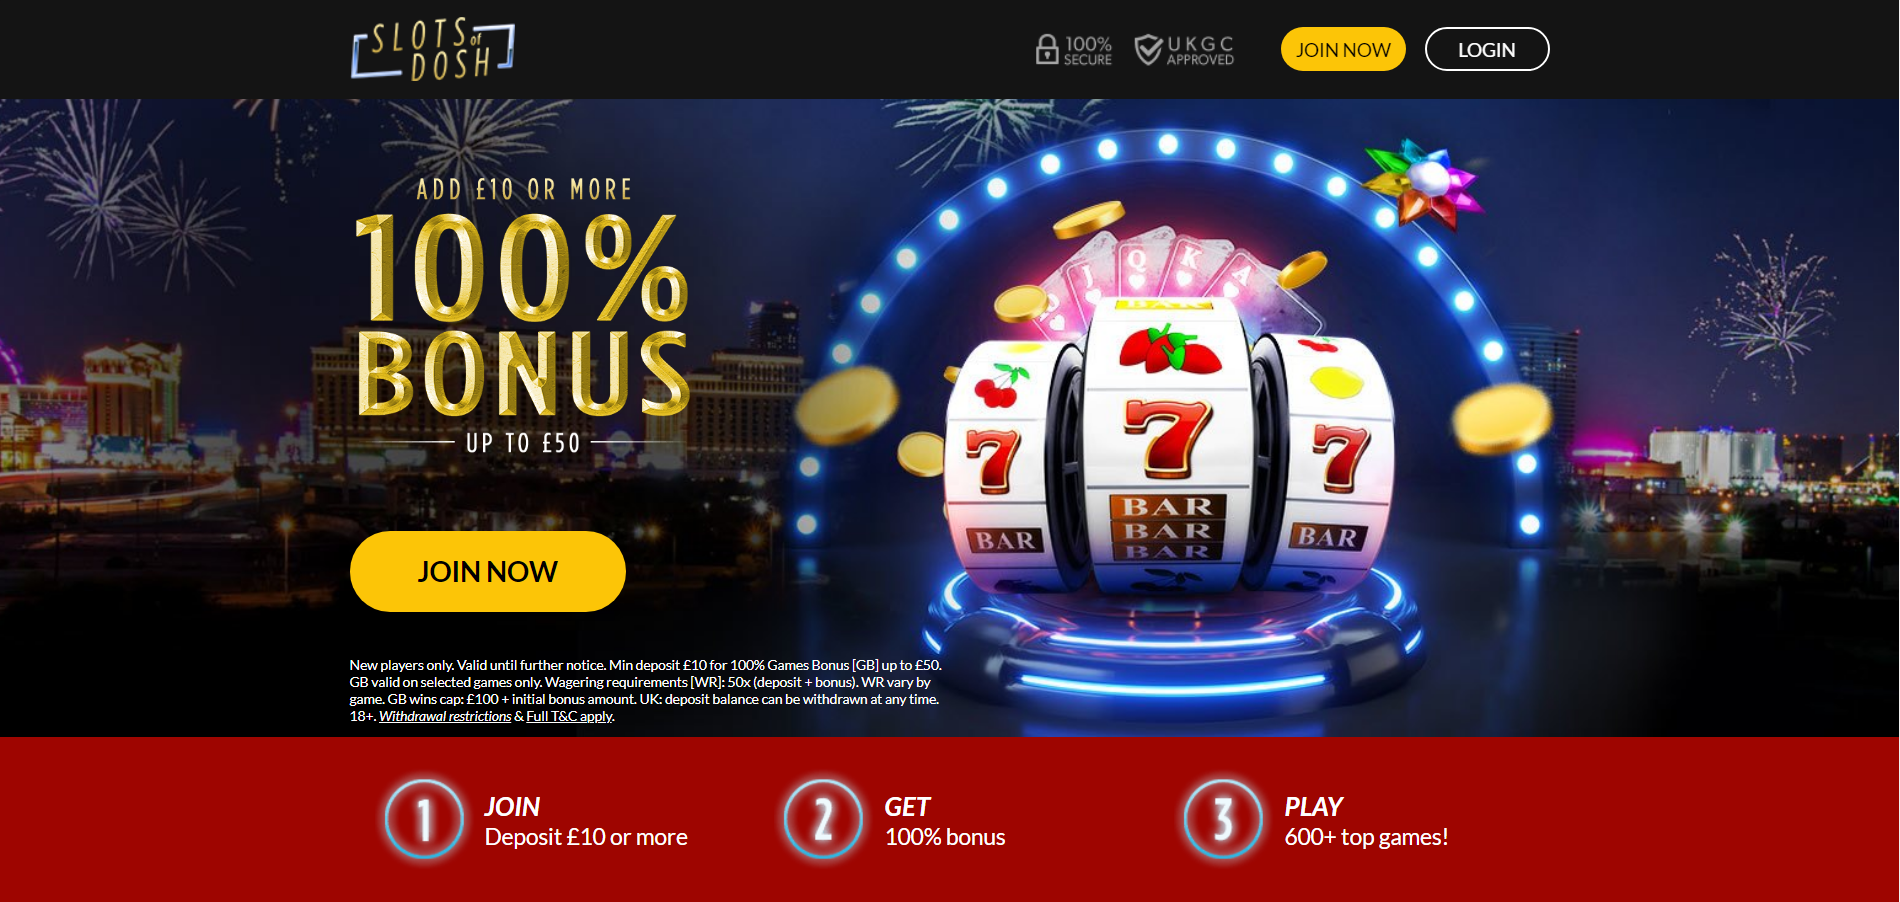 Slots Of Dosh Casino Review